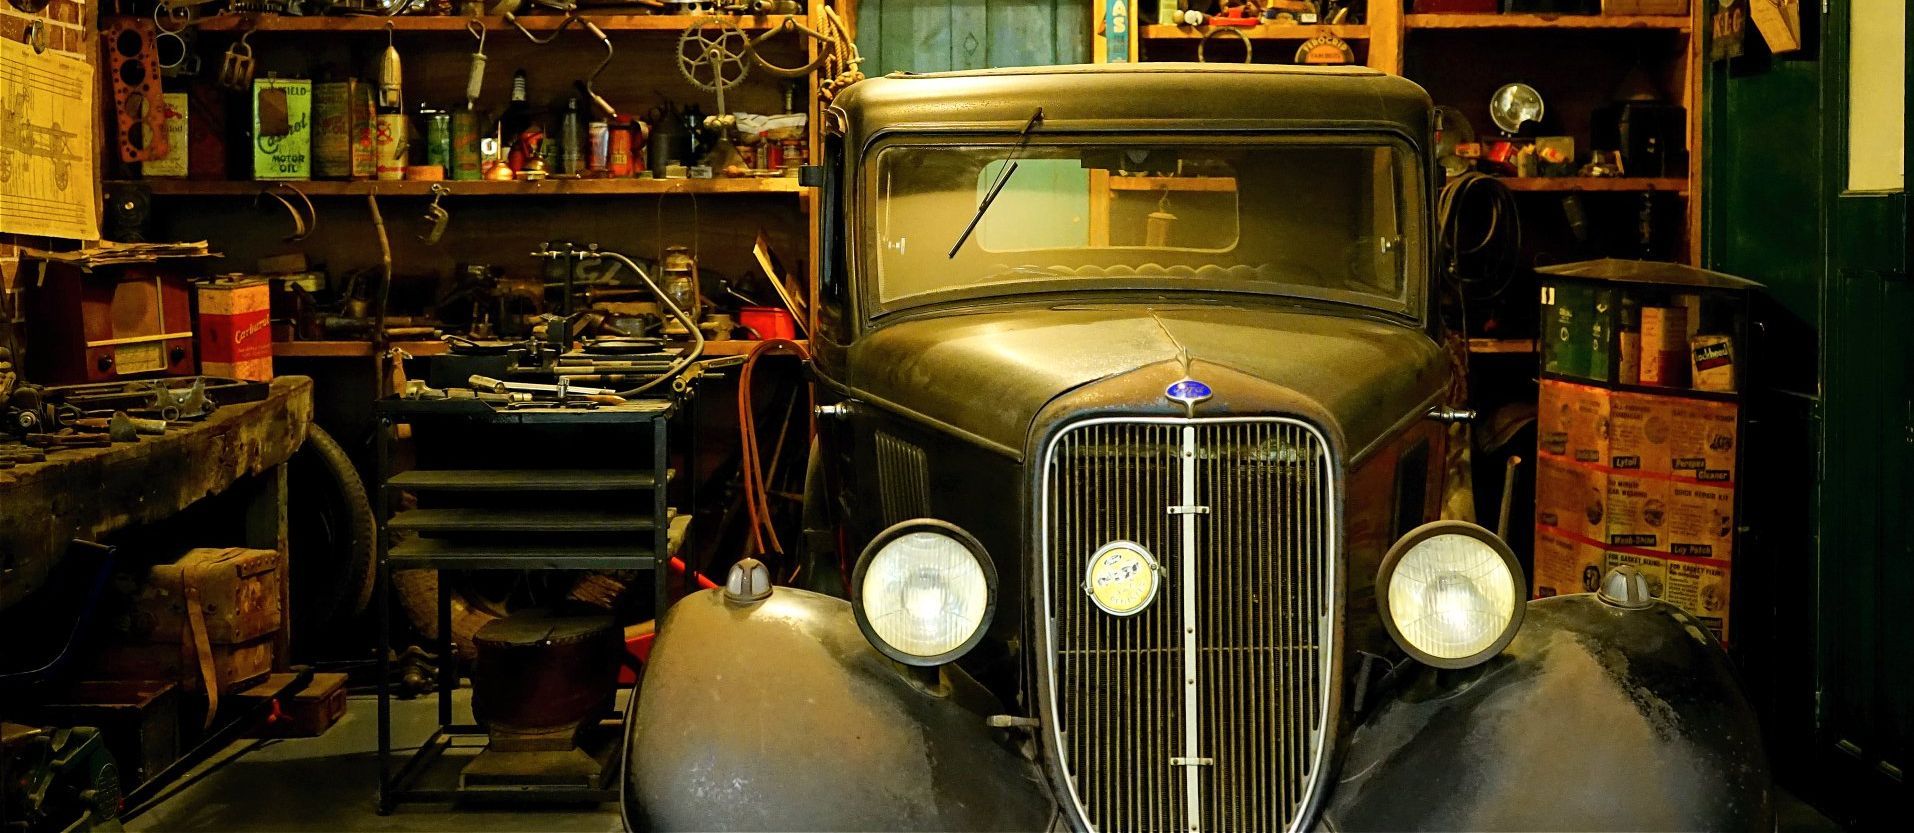 an old, classic car parked in a garage full of tools